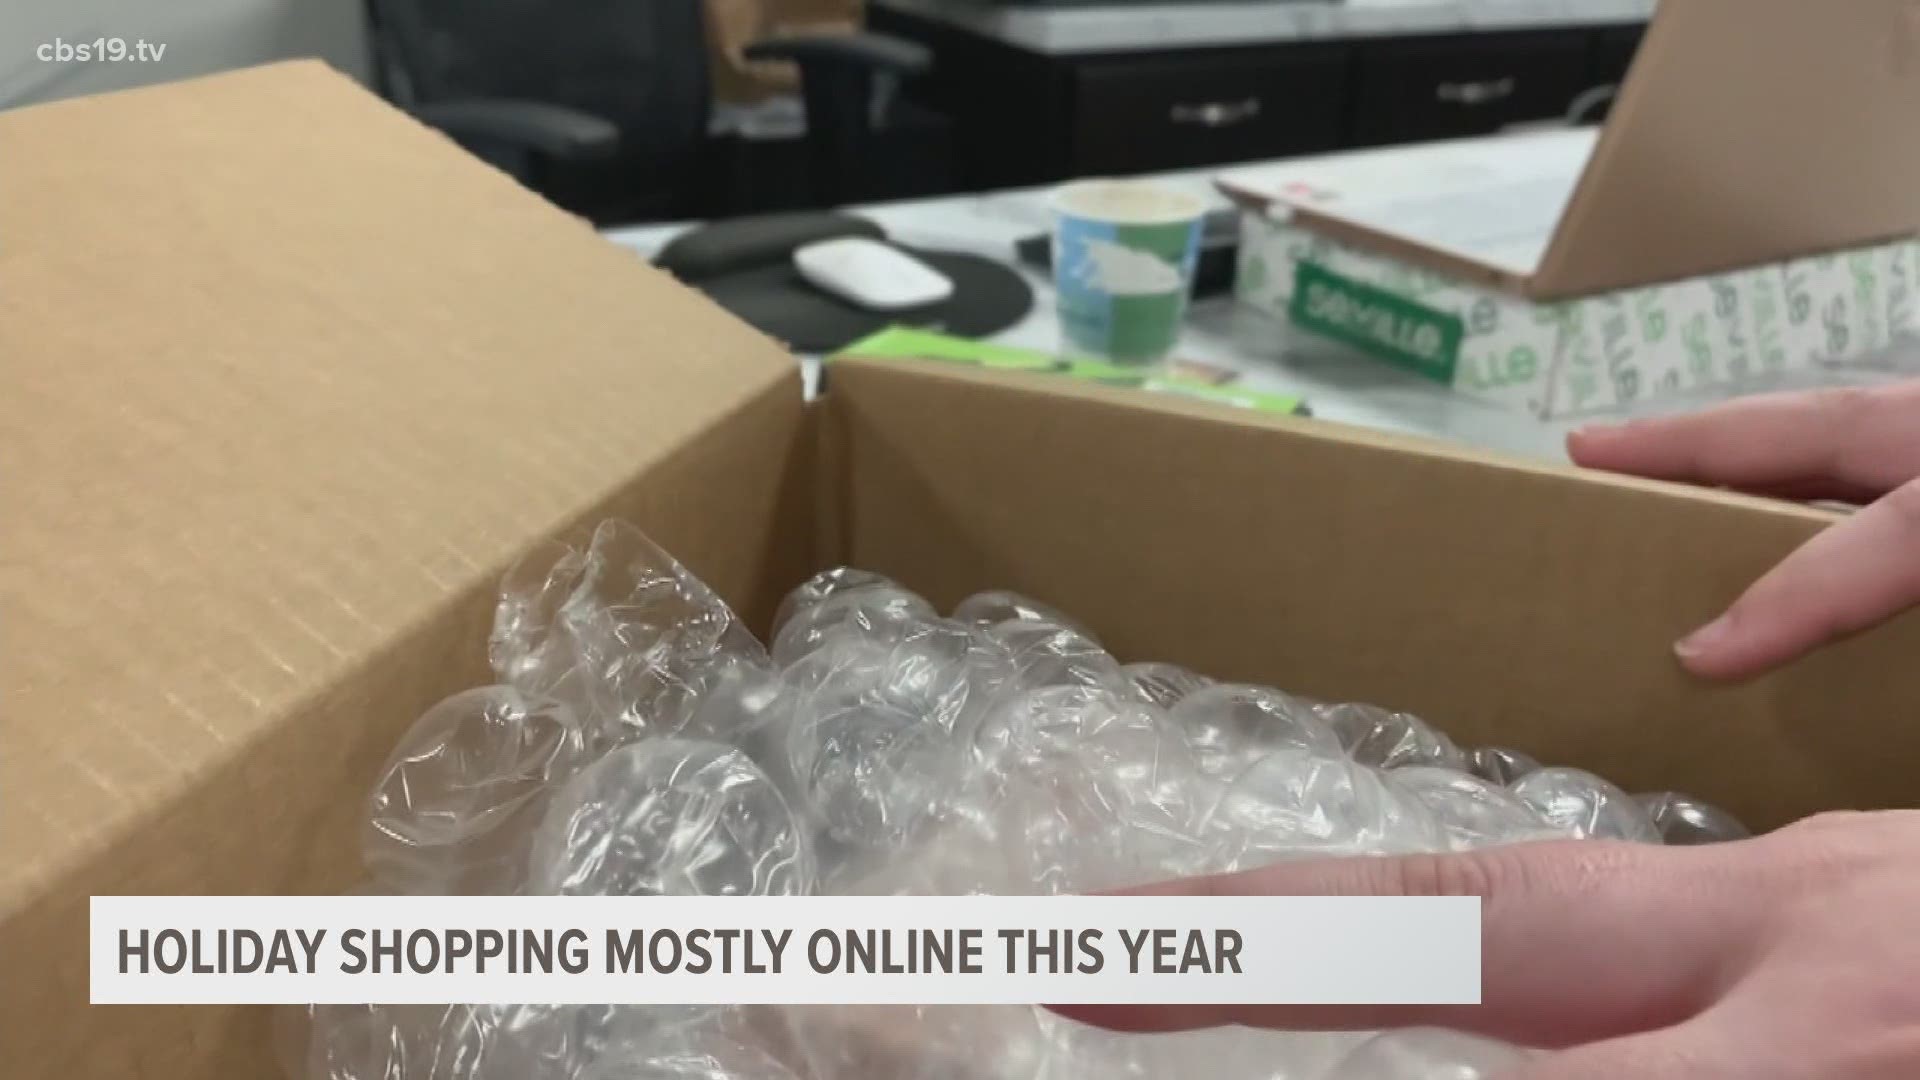 Online sales are set to skyrocket this holiday season which puts local shipping services under serious pressure.